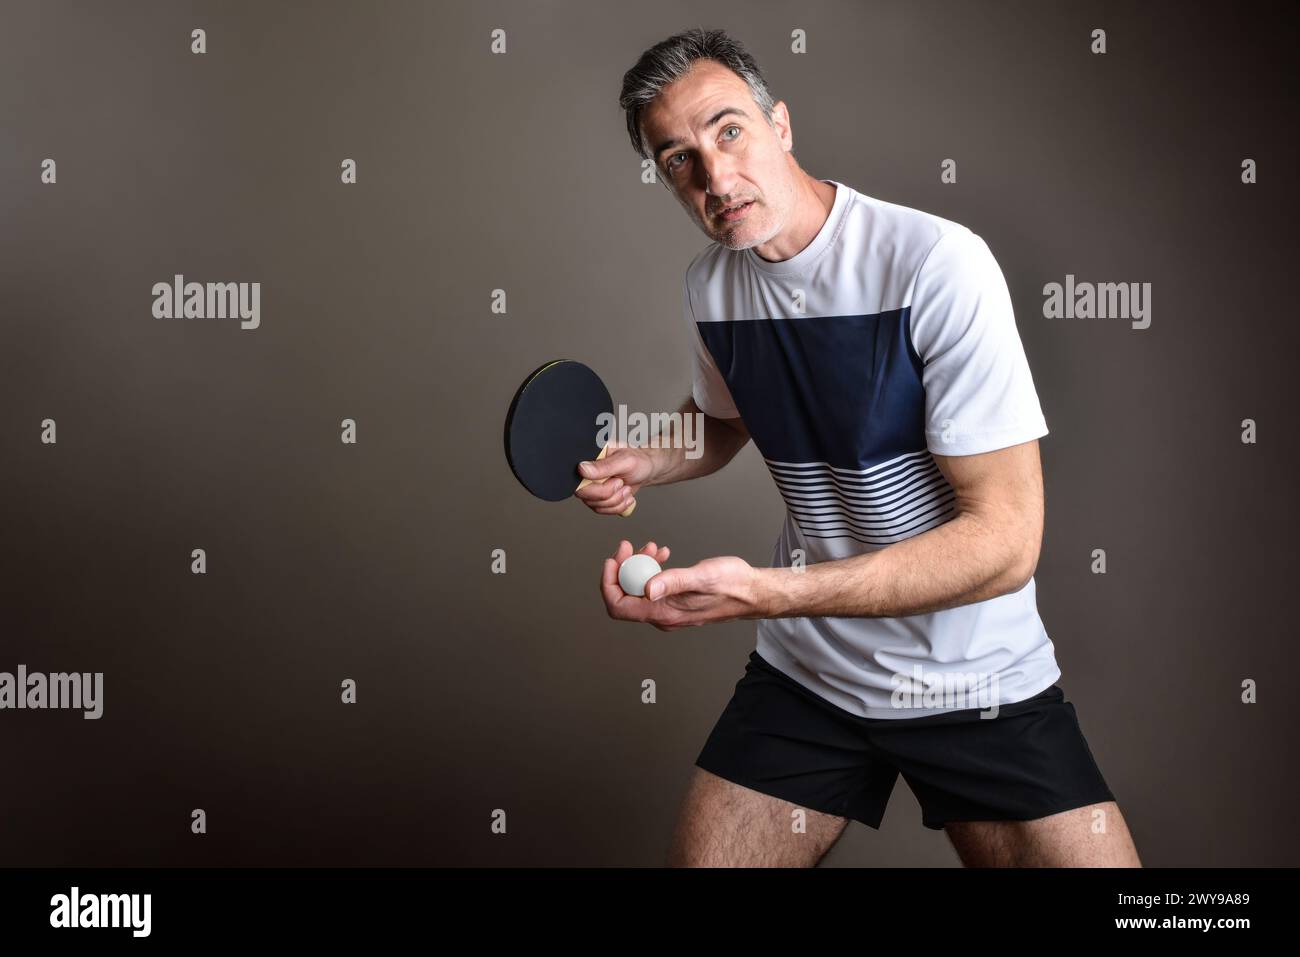 Portrait of ping pong player ready to make a serve with an orange ball in his hand on gray isolated background. Stock Photo